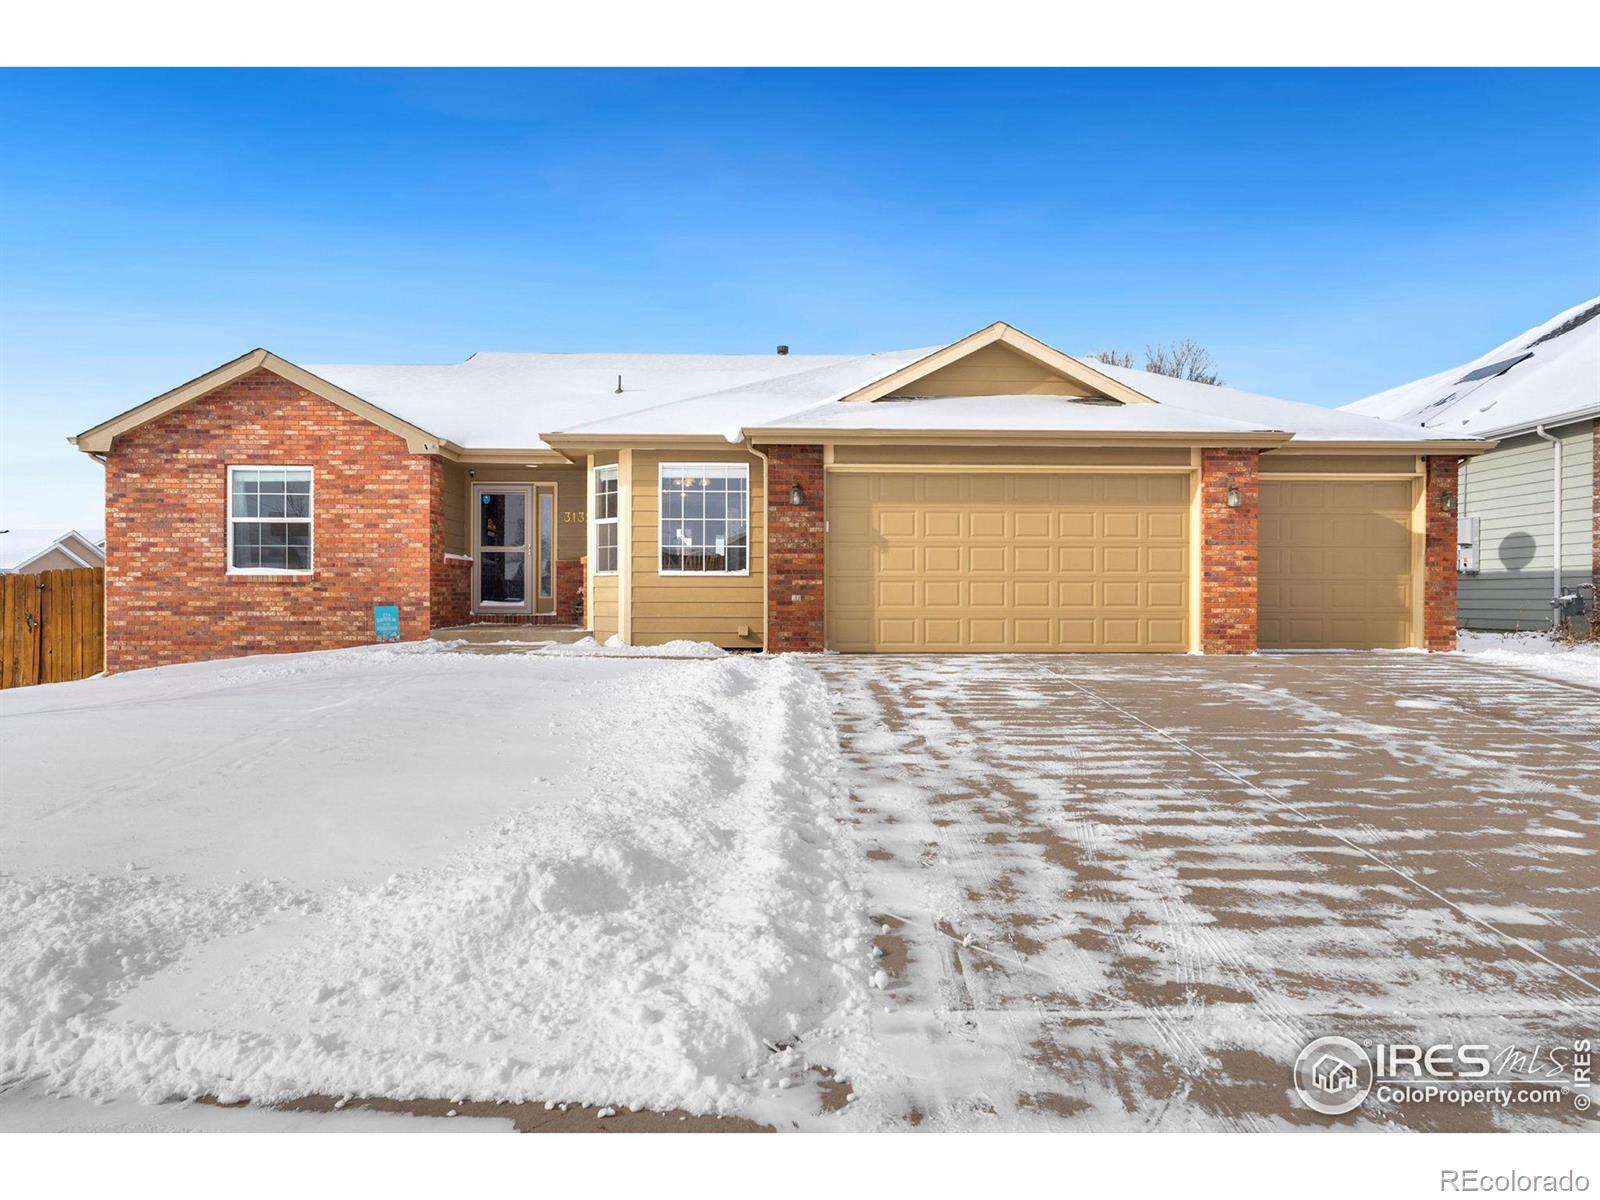 3139  58th Avenue, greeley MLS: 4567891002053 Beds: 3 Baths: 2 Price: $490,000